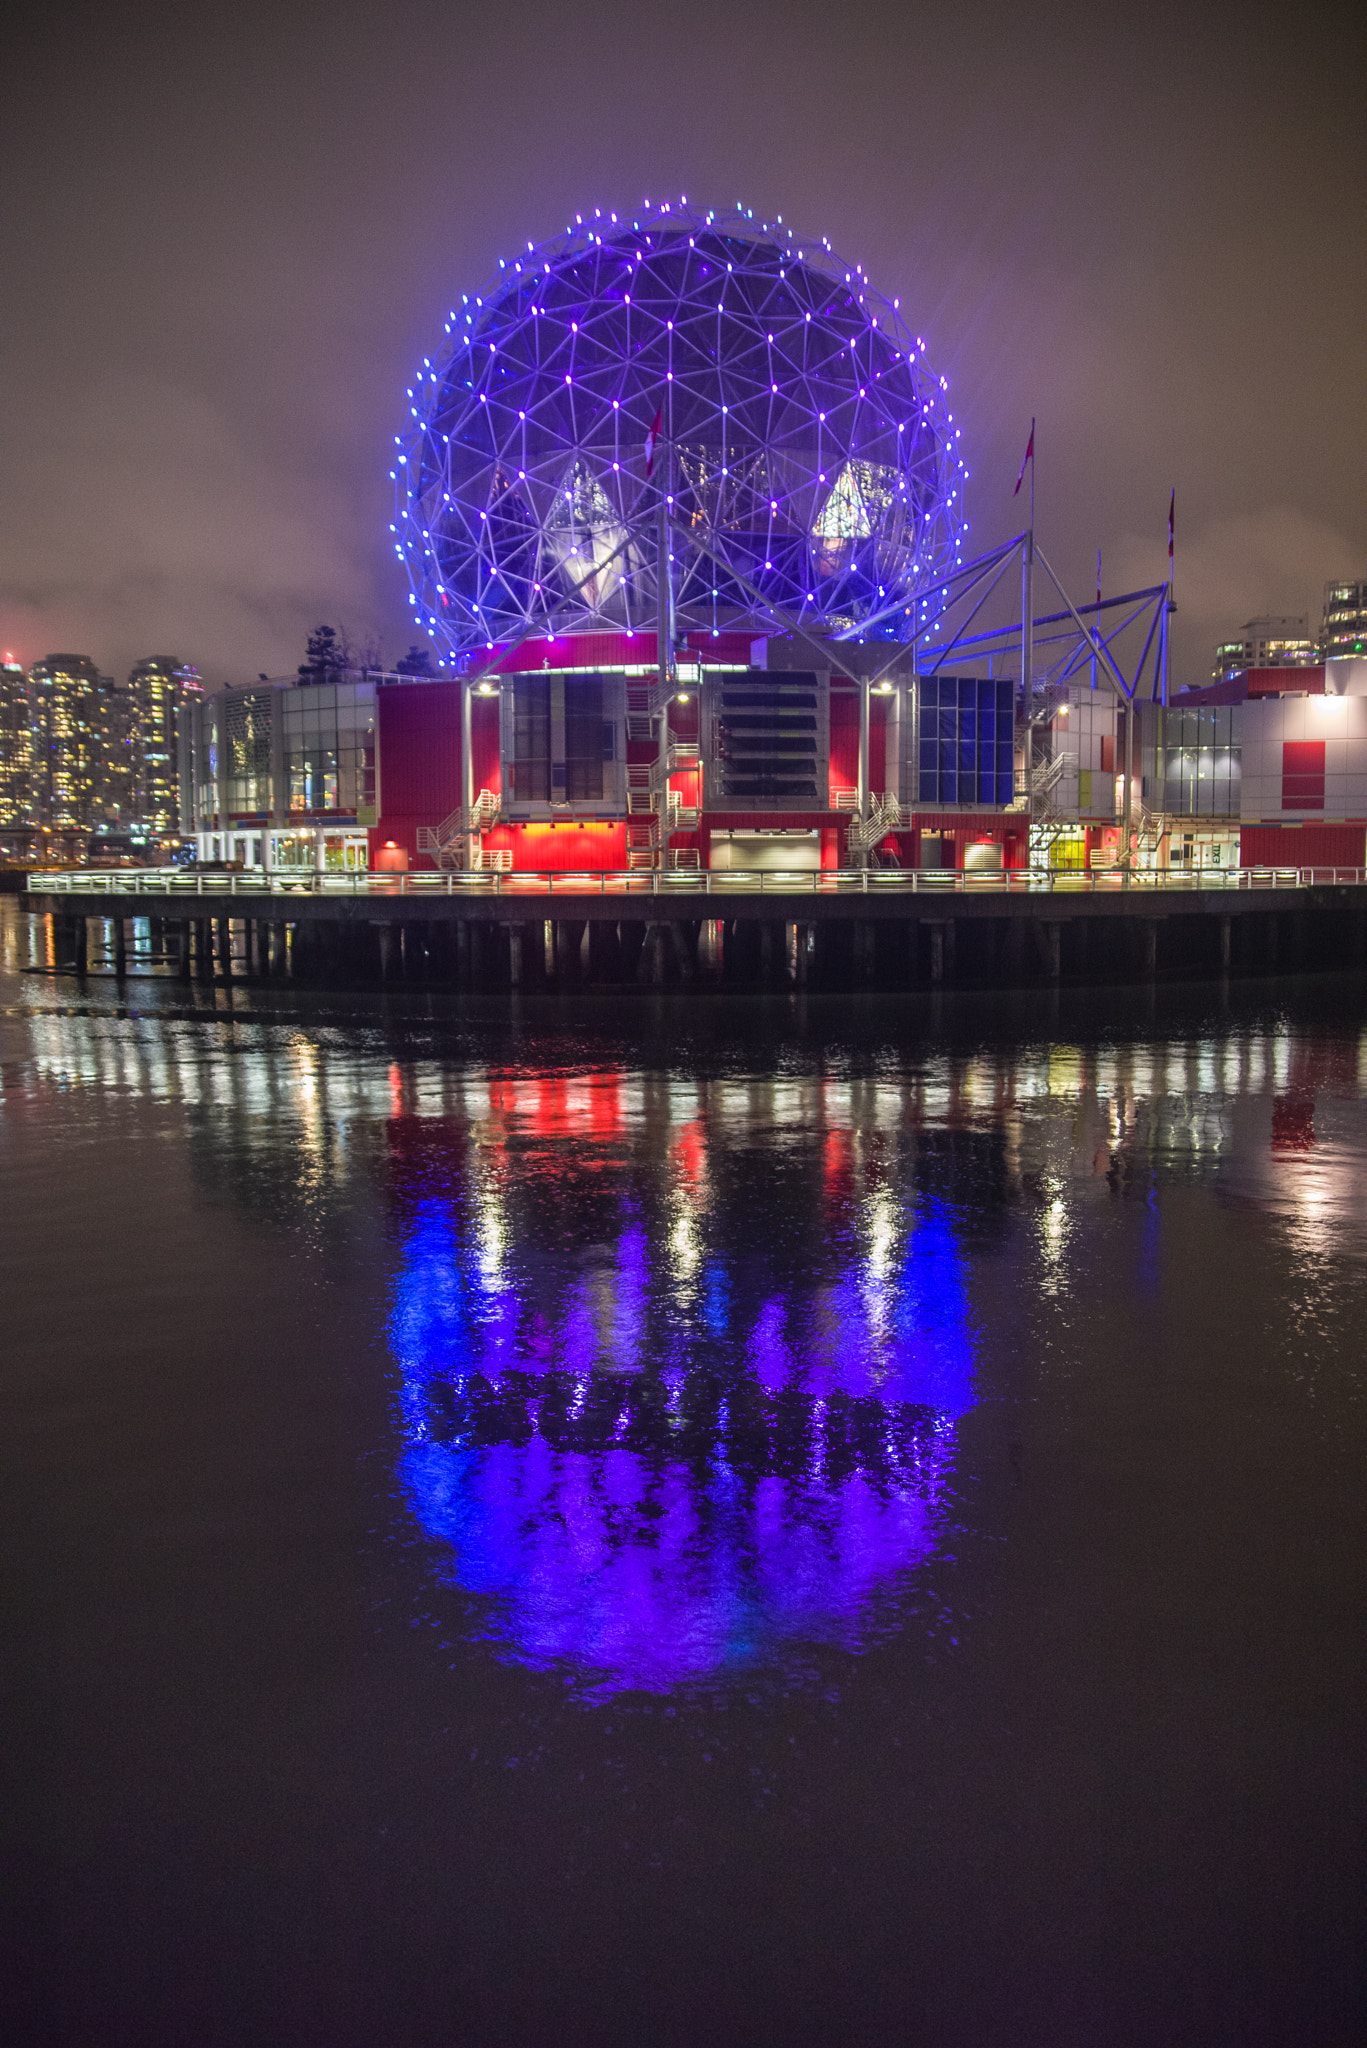 Tamron AF 28-75mm F2.8 XR Di LD Aspherical (IF) sample photo. Sphere under the rain science world vancouver photography